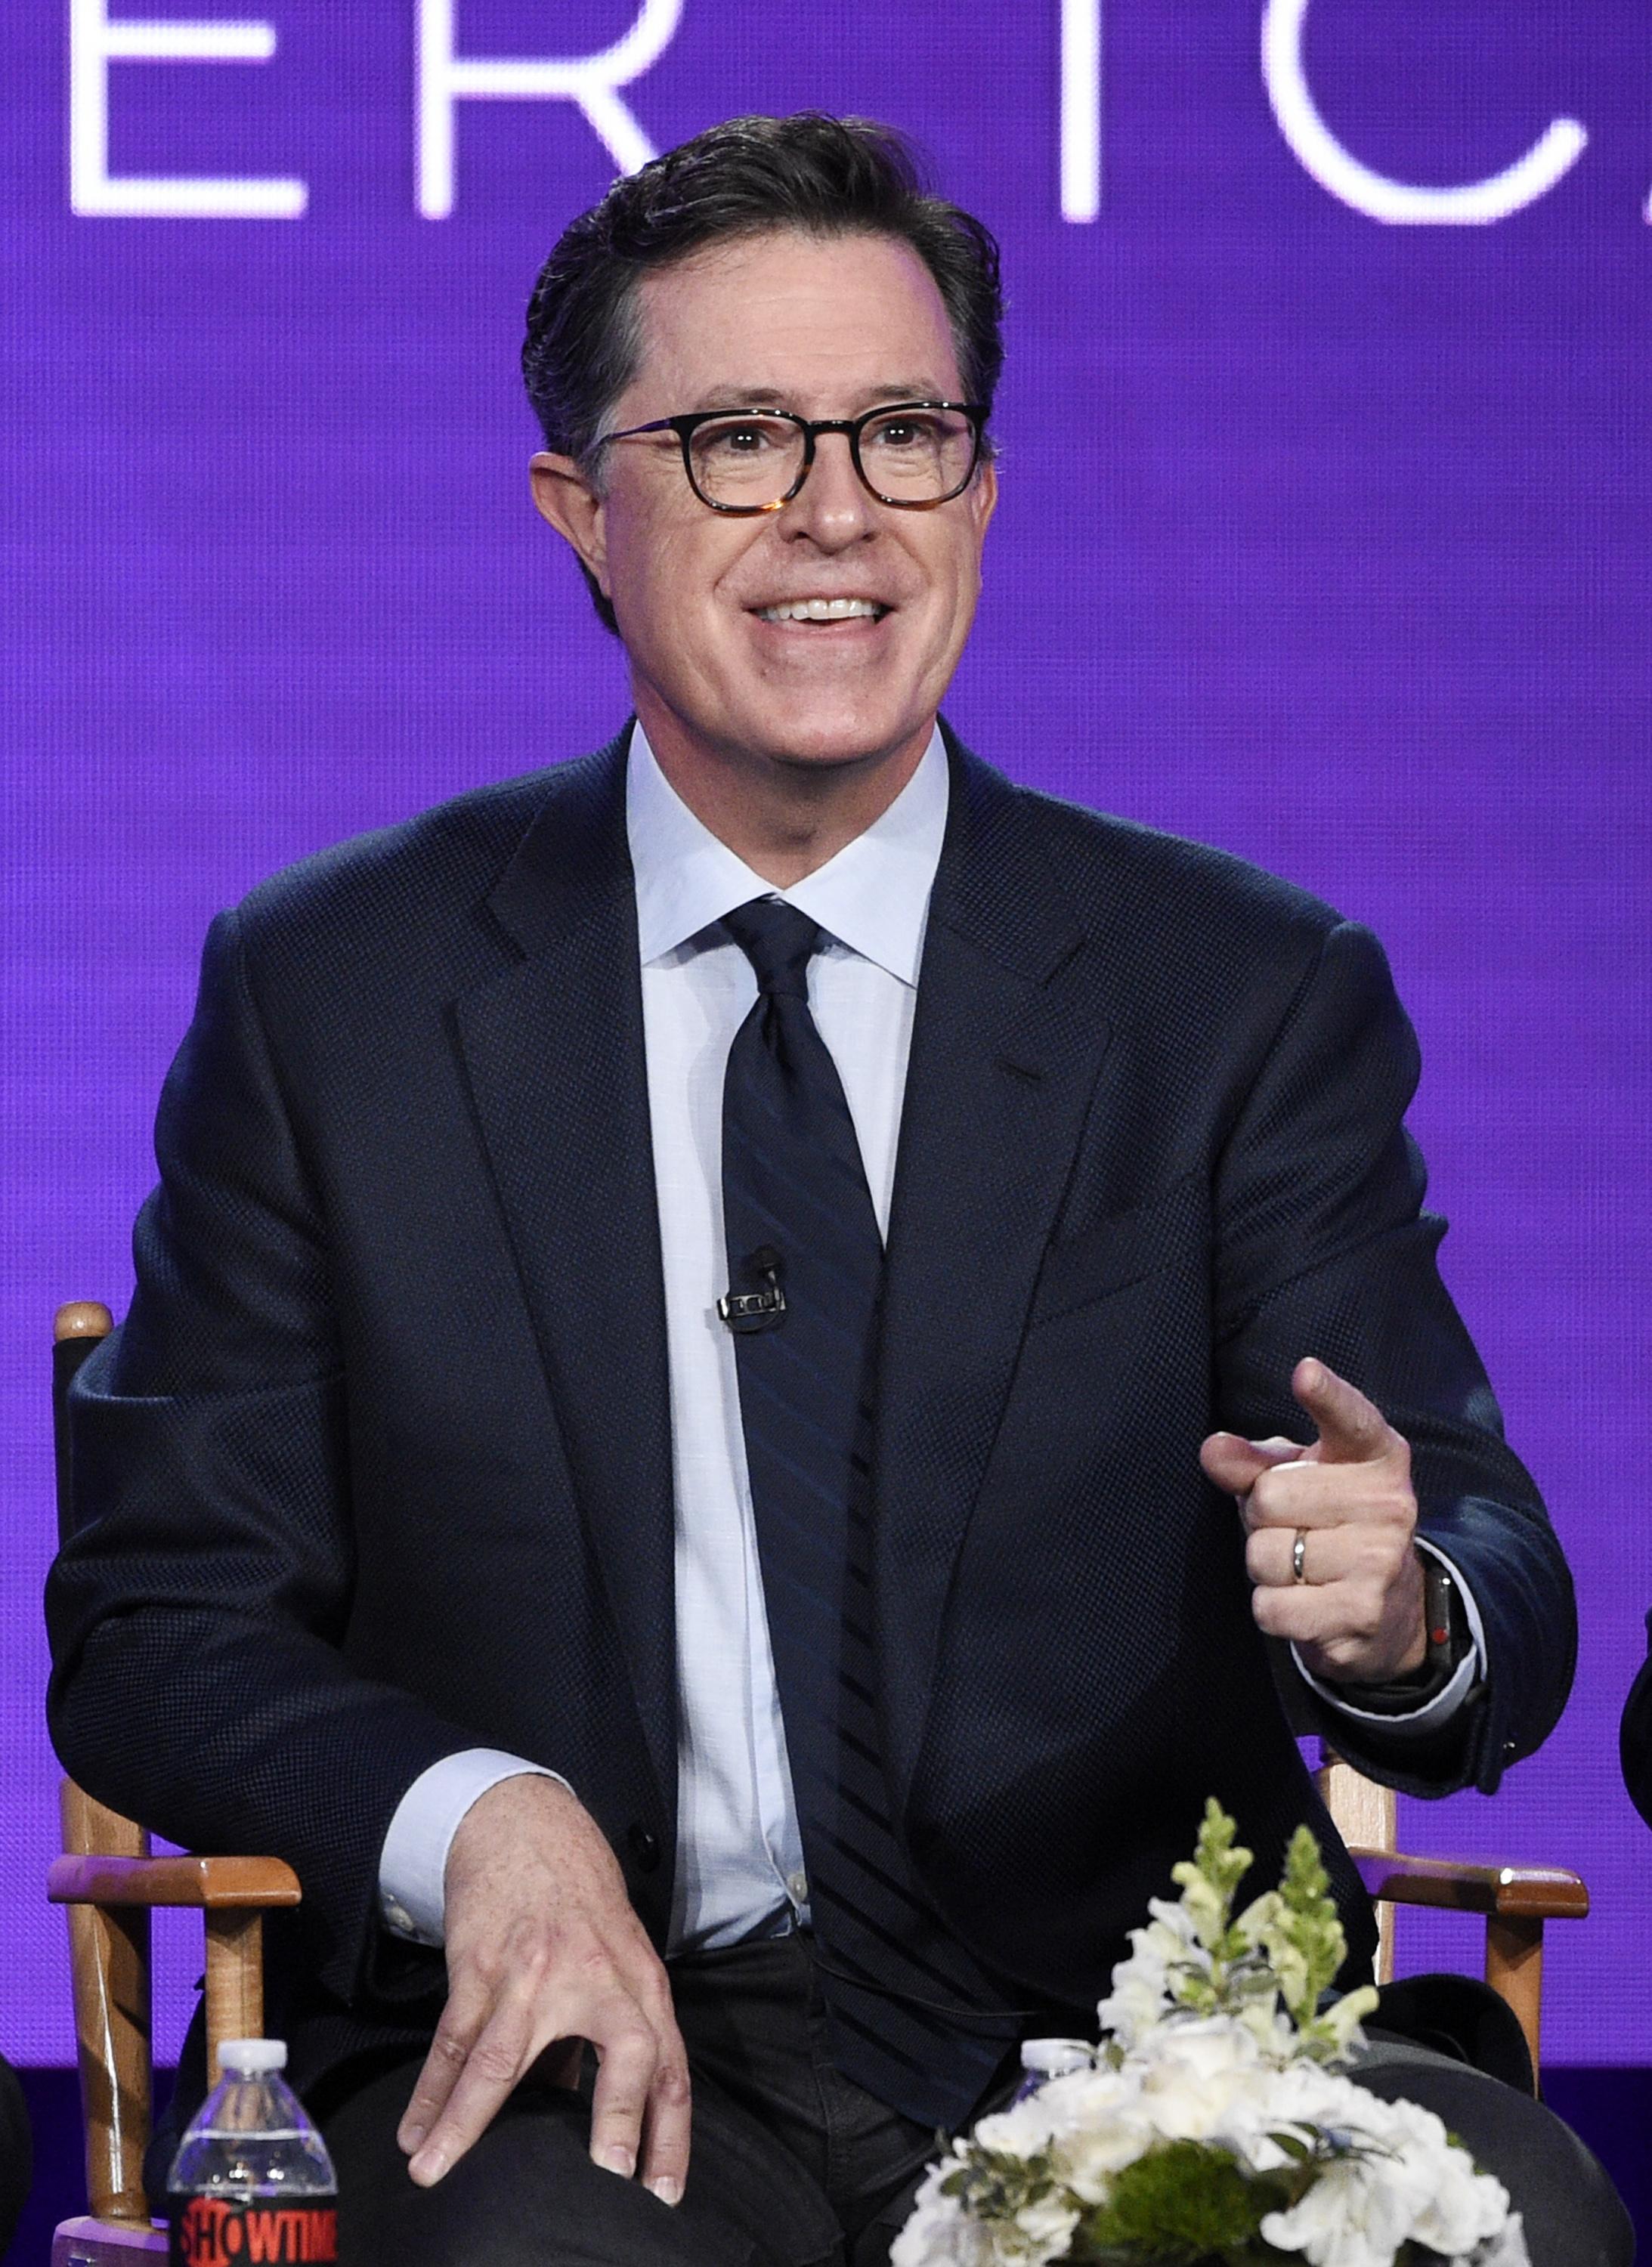 Stephen Colbert to go live again after Trump’s State of the Union The